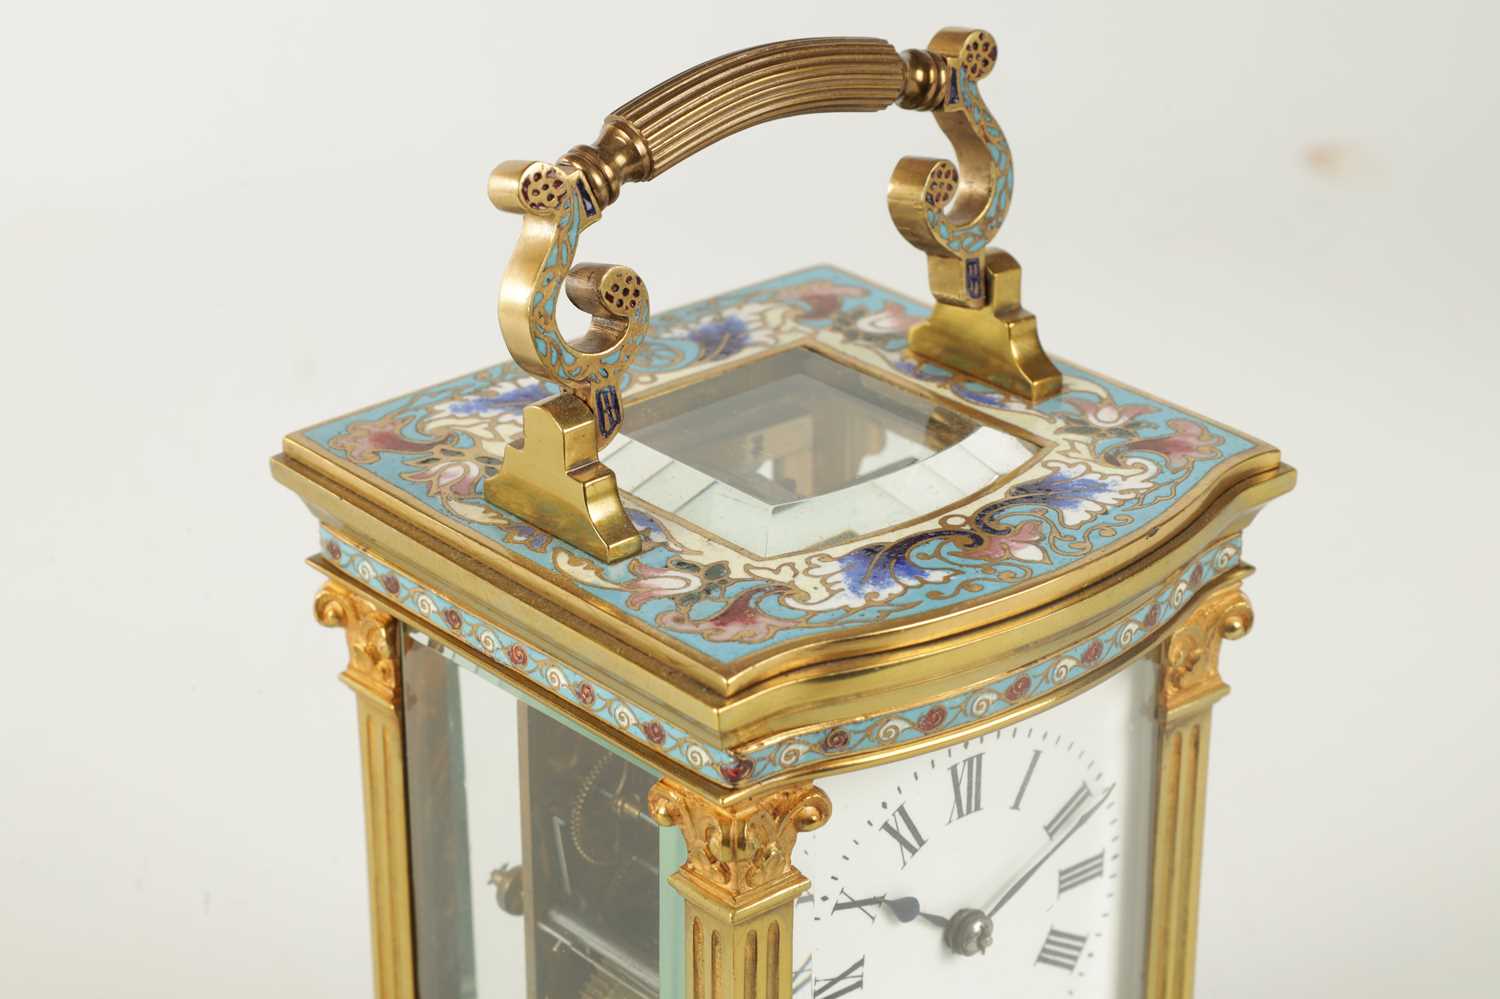 A LATE 19TH CENTURY FRENCH CHAMPLEVE ENAMEL STRIKING CARRIAGE CLOCK - Image 5 of 8